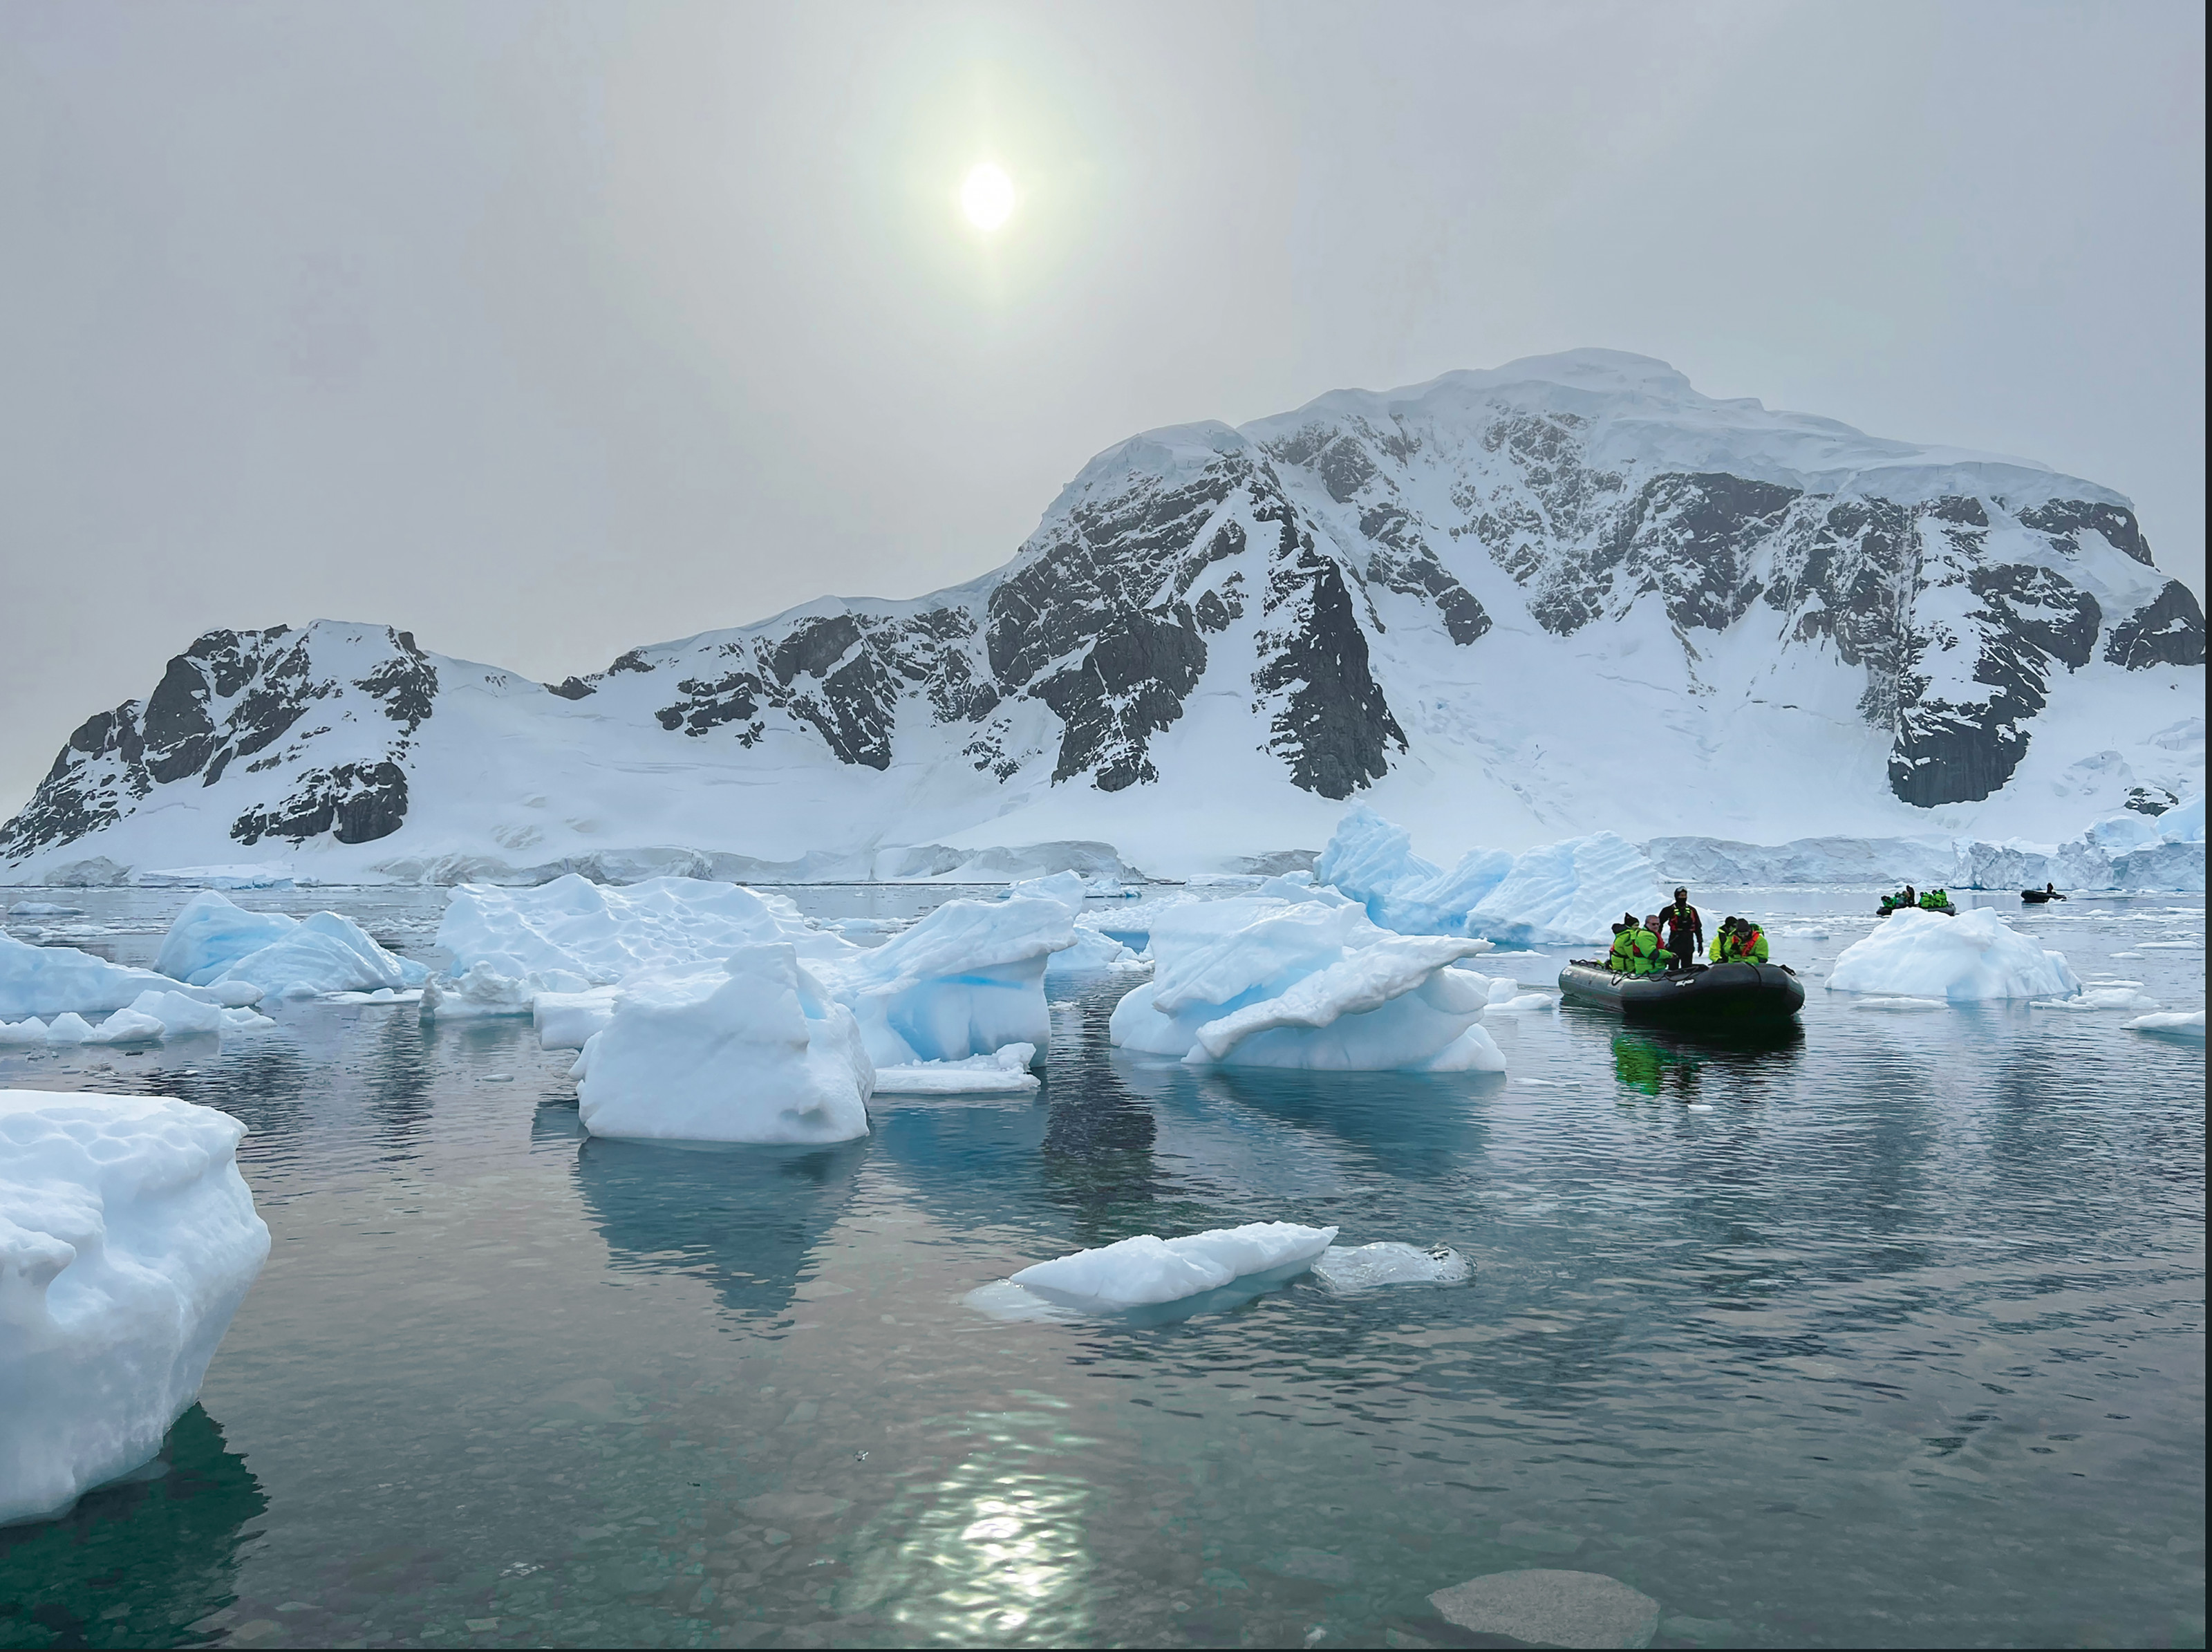    An Adventure in Antarctica     In January, a group of 37 intrepid travelers?led by Ken Clifton...